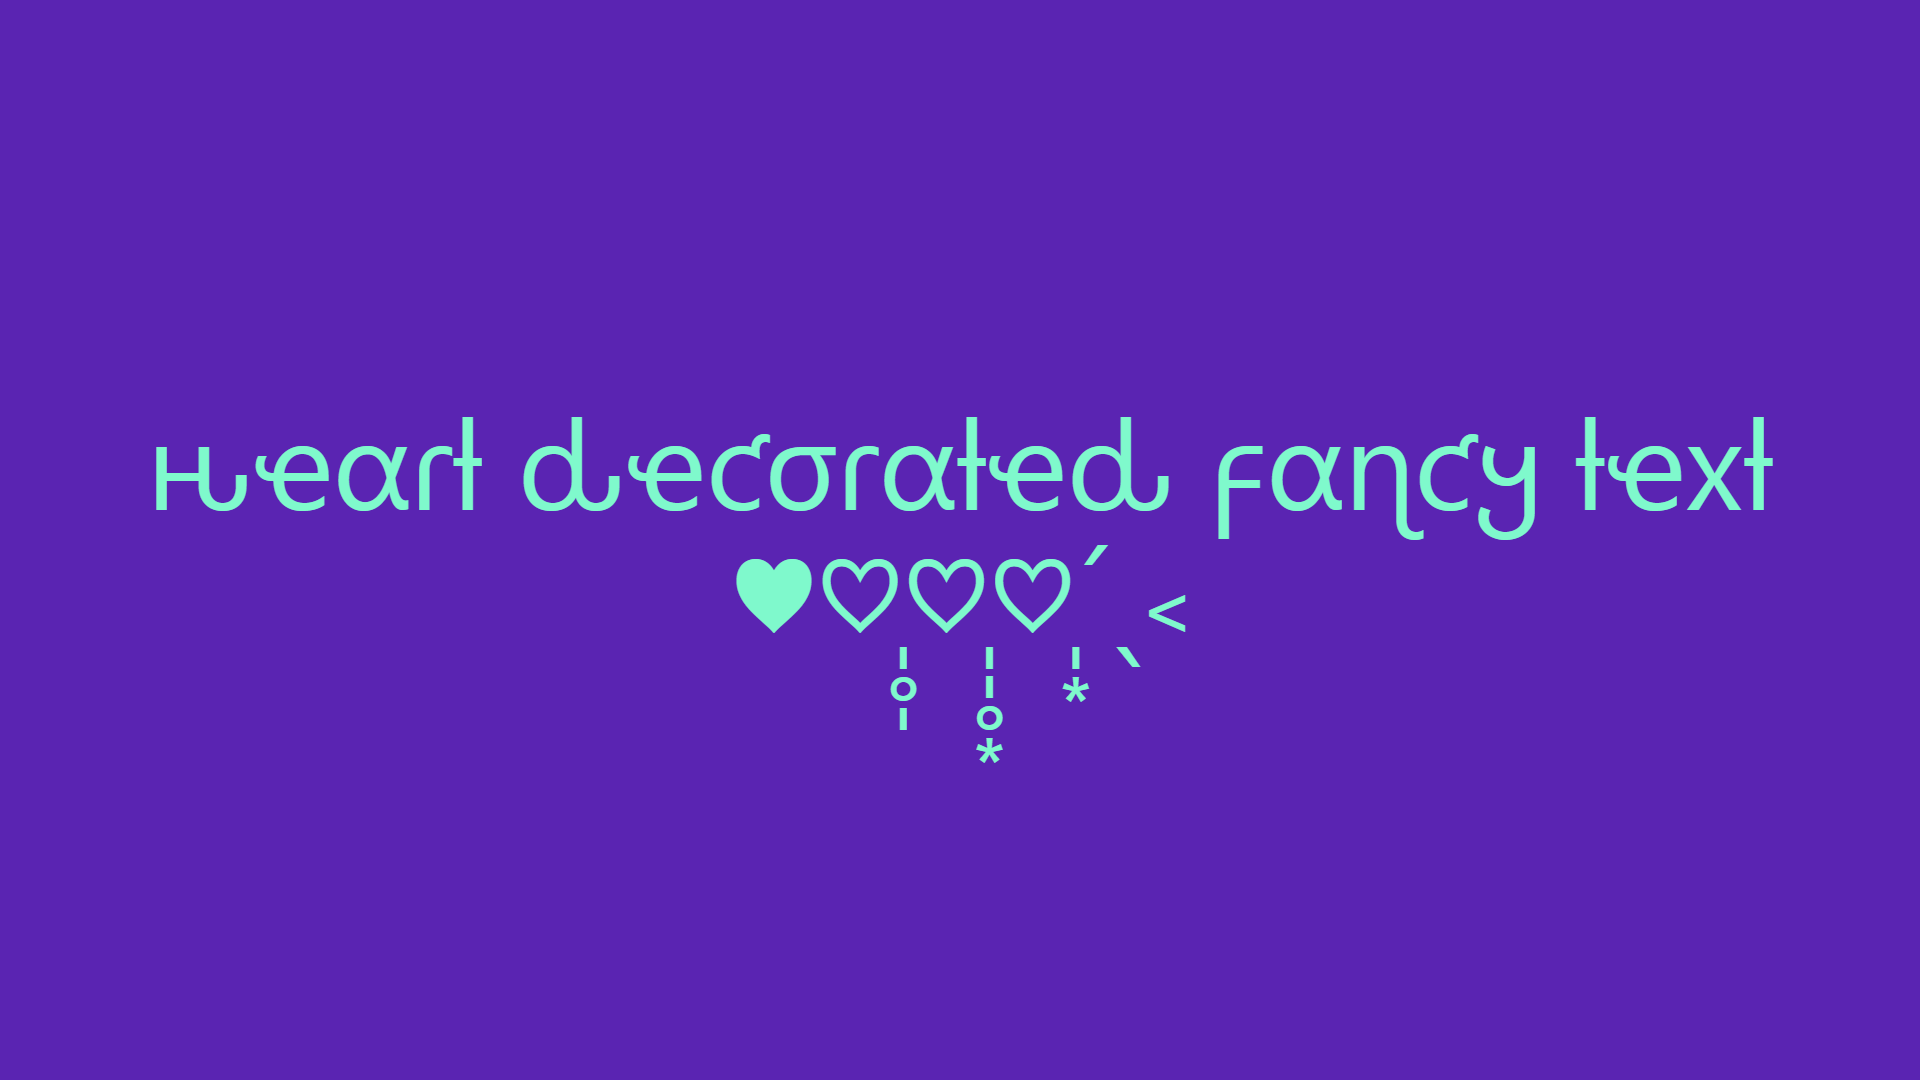 Heart Decorated Fancy Text Generator